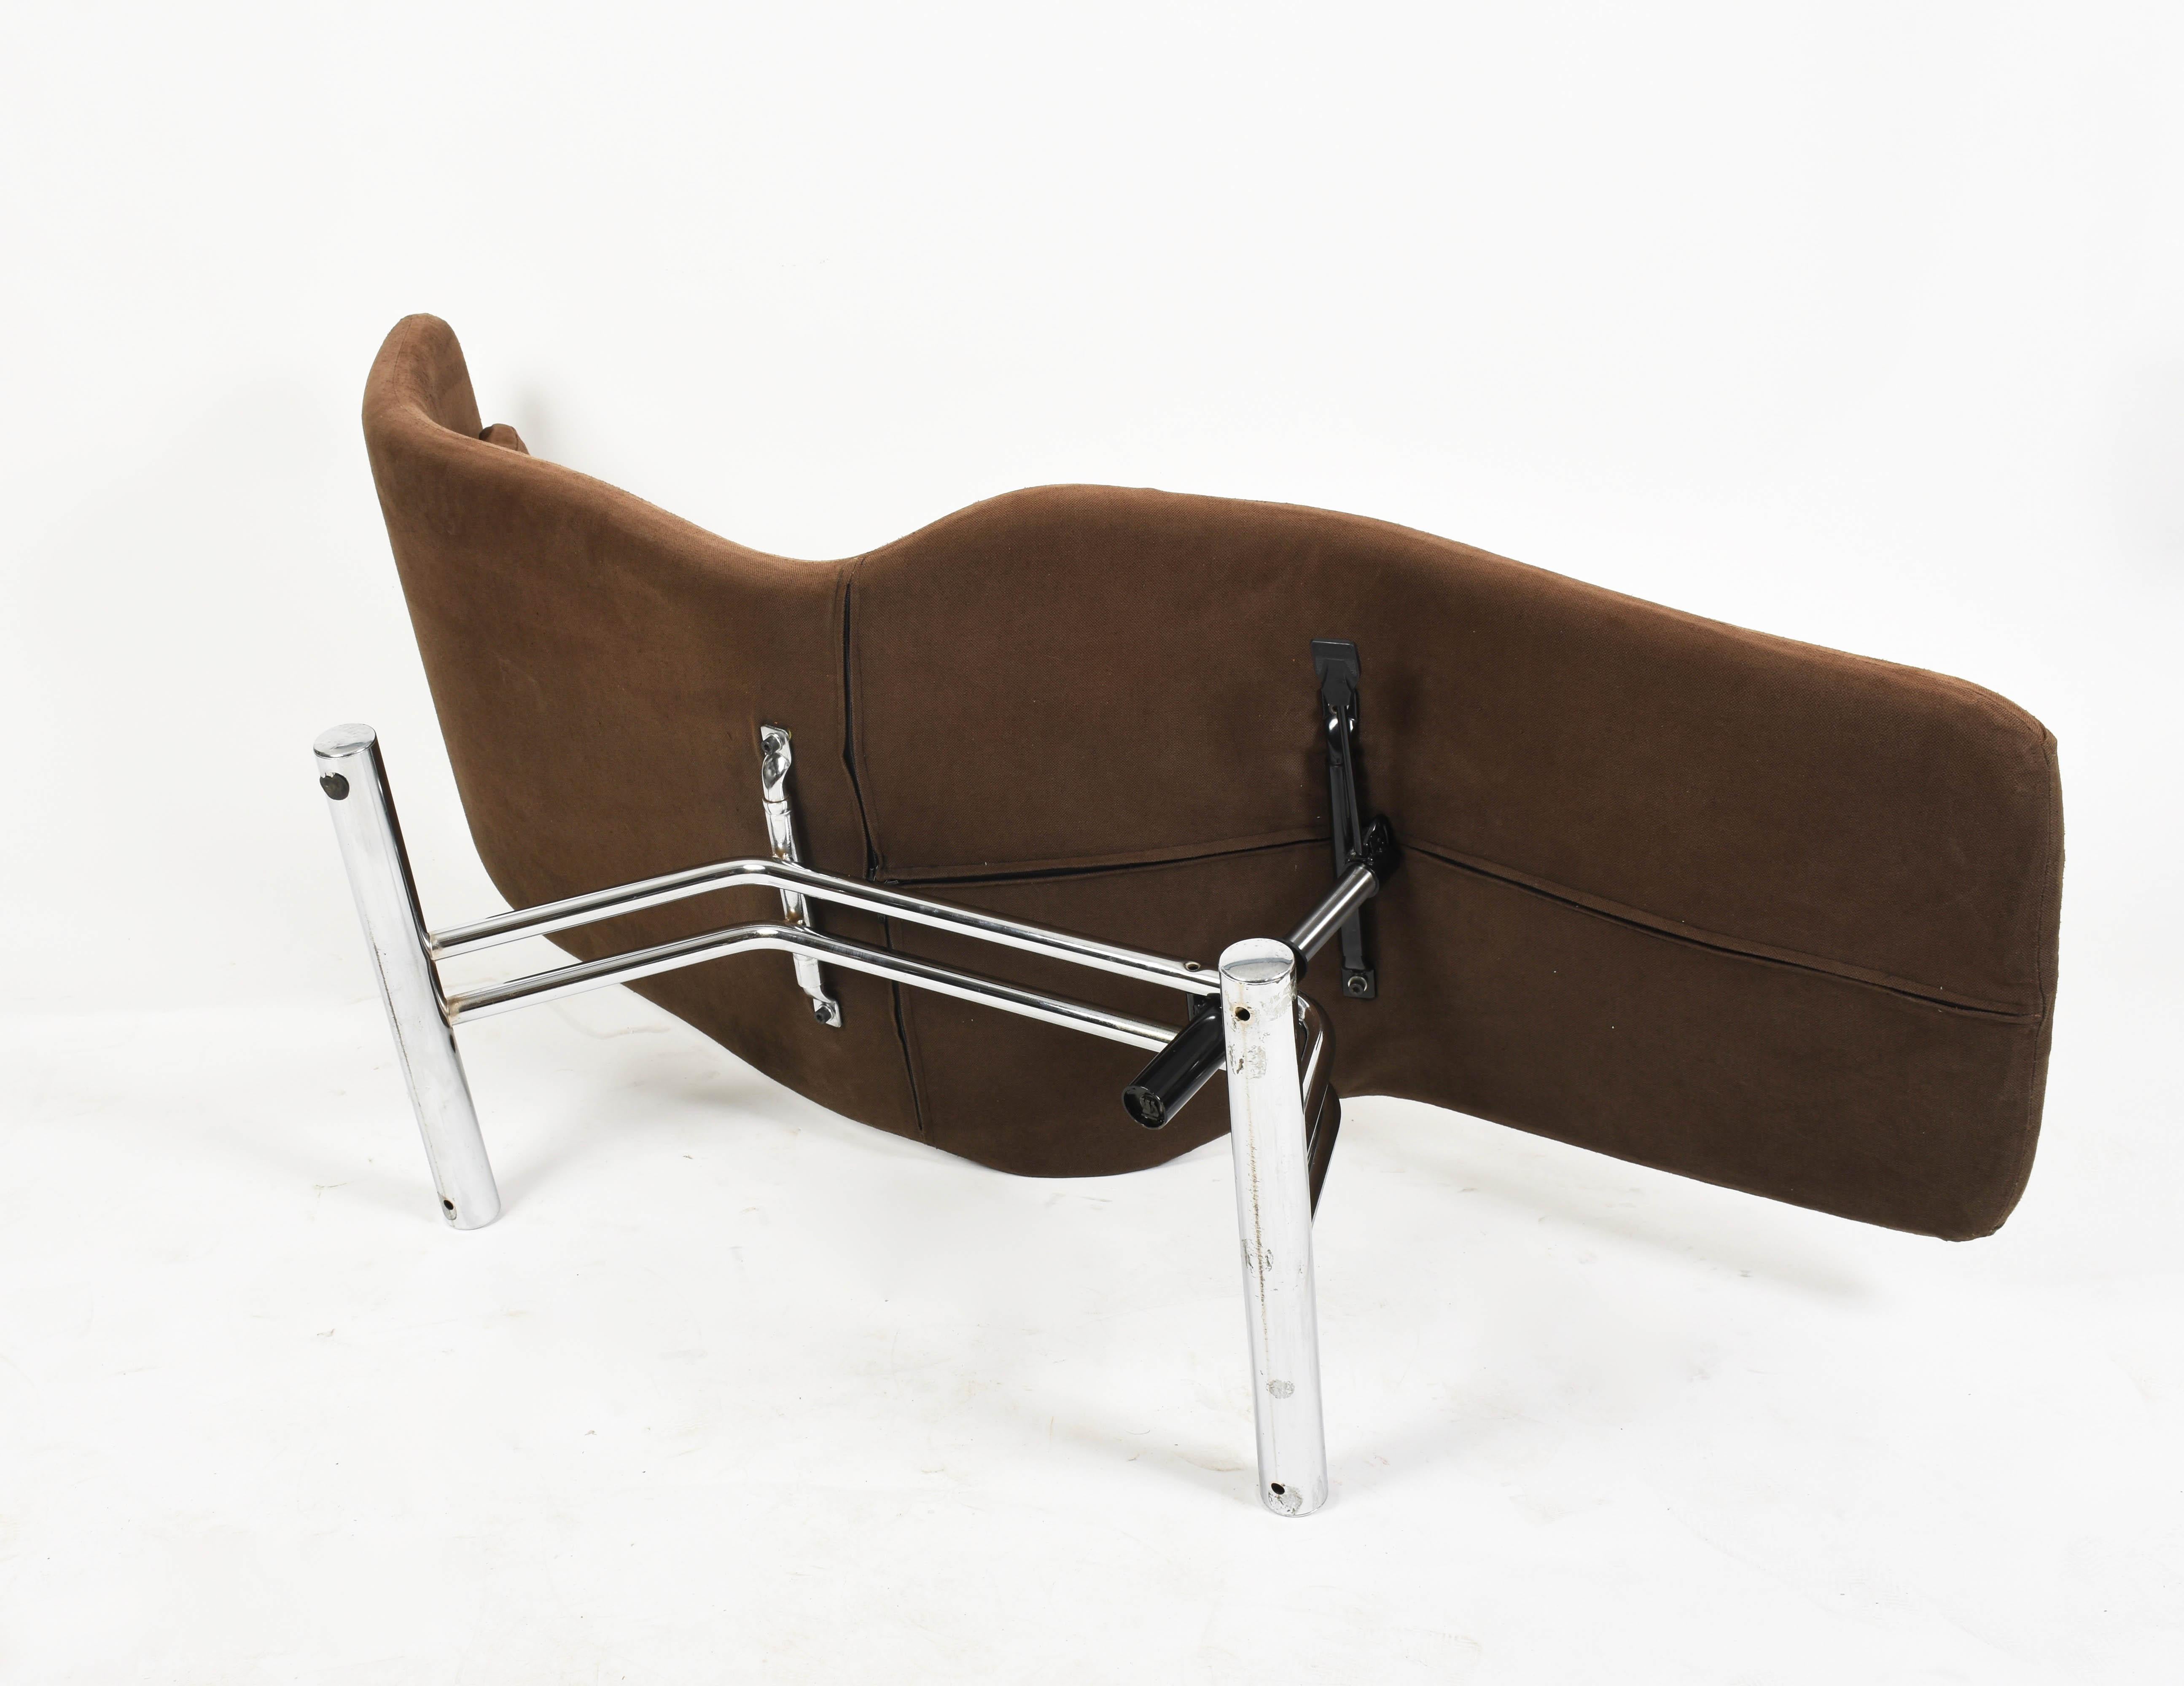 Midcentury Brown Fabric and Chrome Steel Chaise Longue, Paul Tuttle Style, 1980s For Sale 10